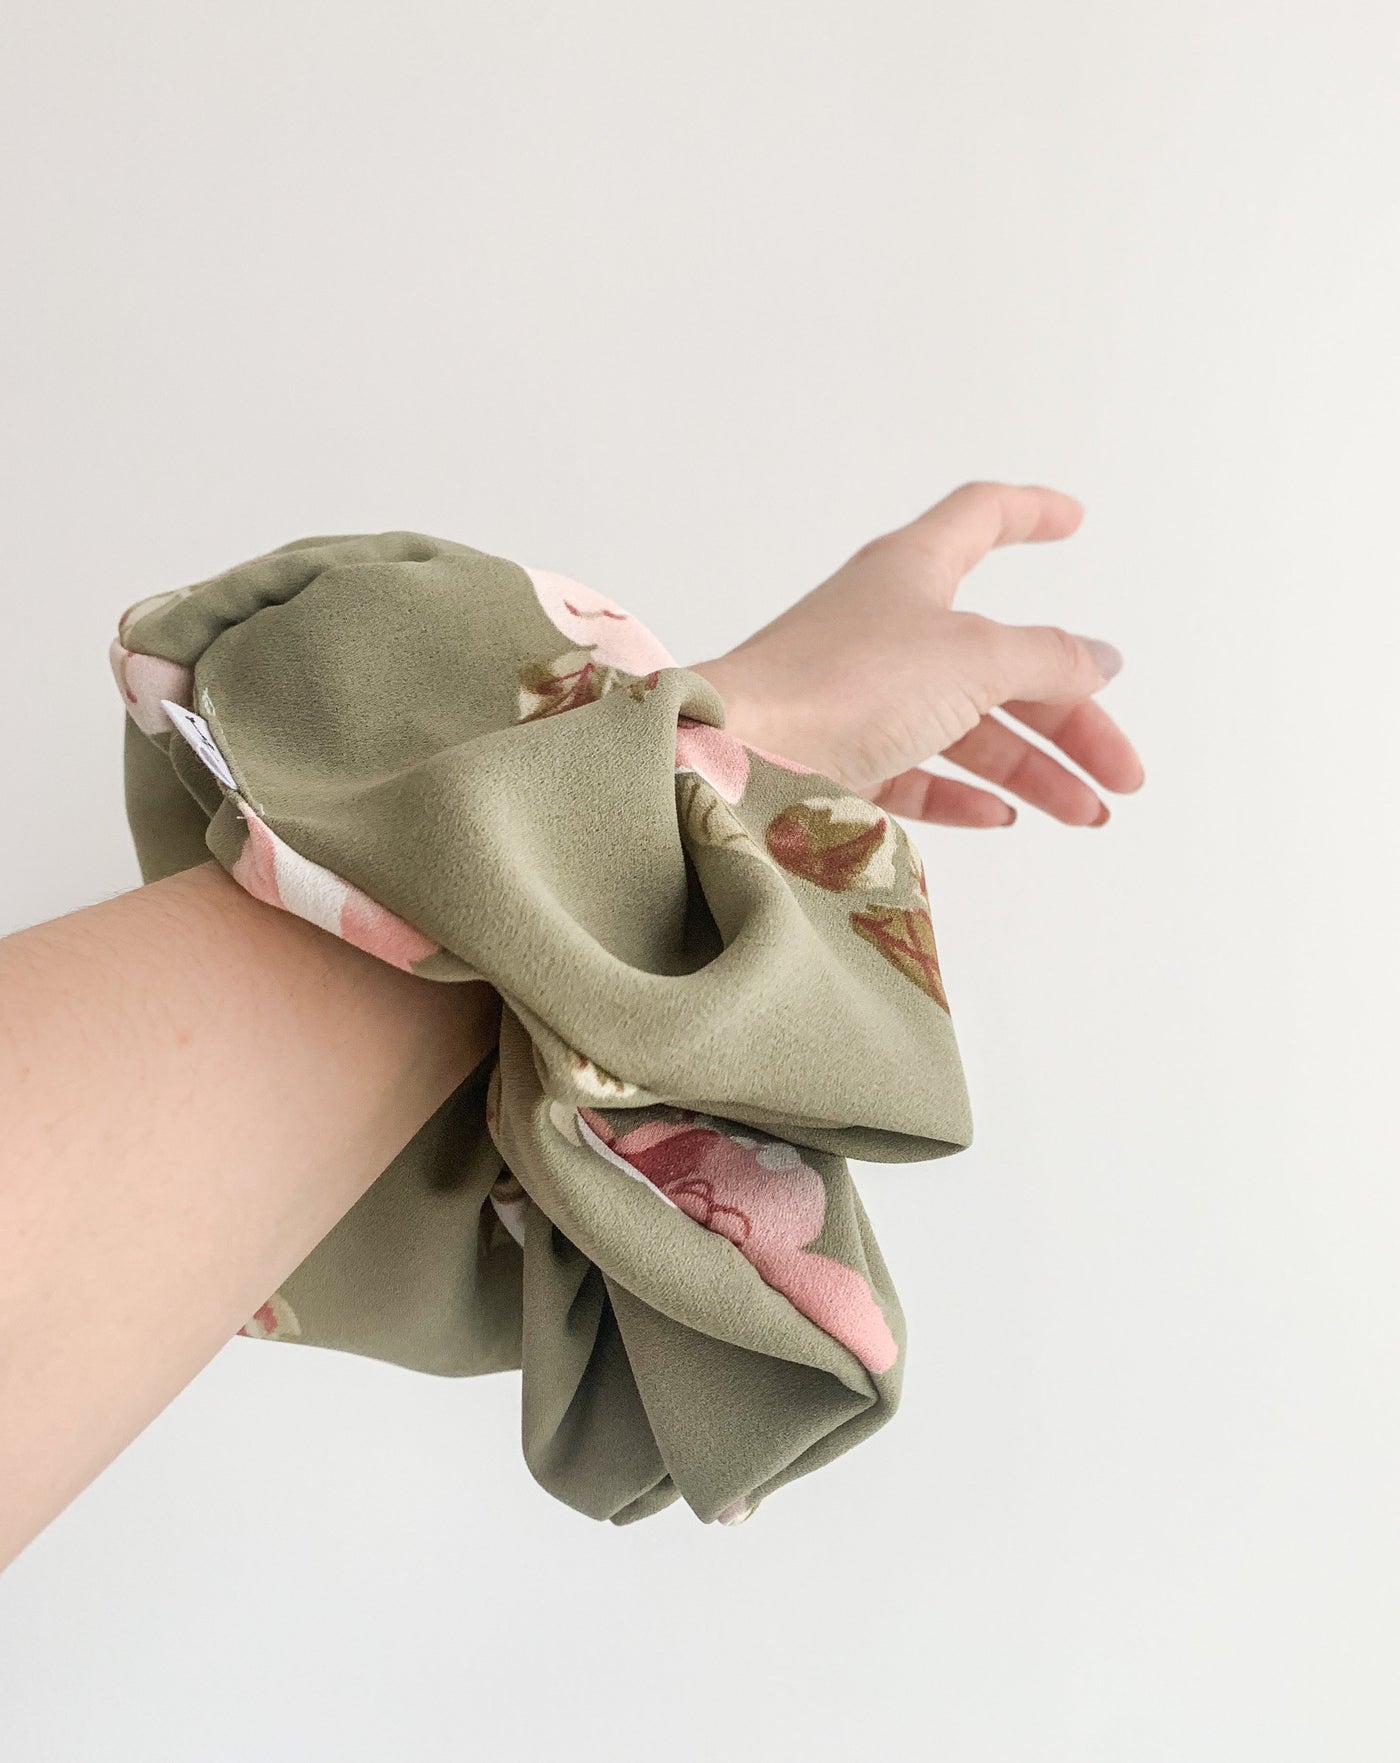 Fluffy Grande Luxe floral green scrunchie on arm.